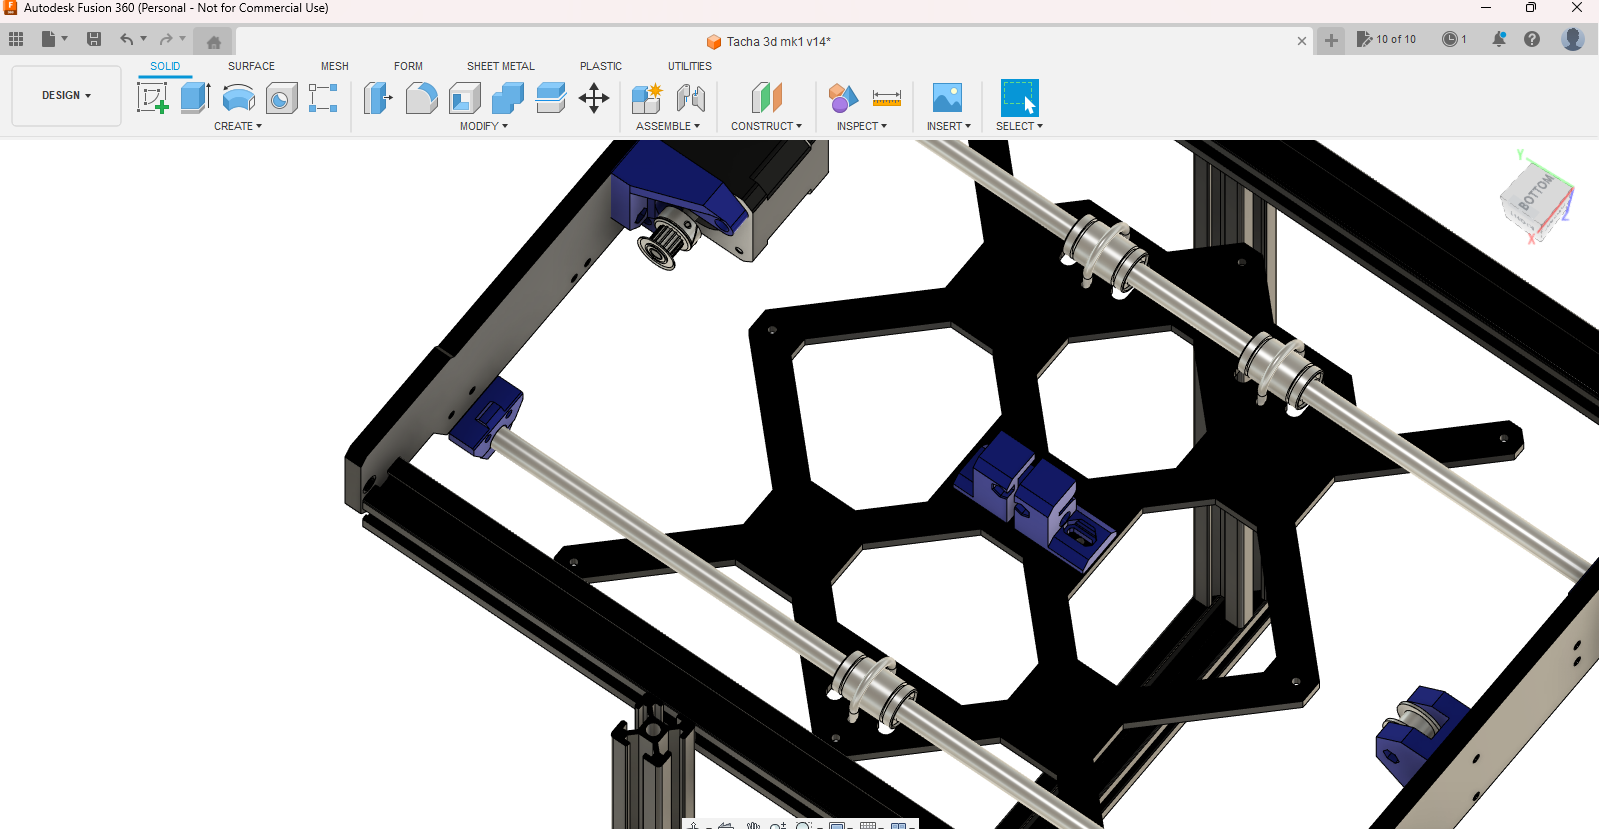 Autodesk Fusion 360 (Personal - Not for Commercial Use) 6_30_2023 9_29_26 PM.png